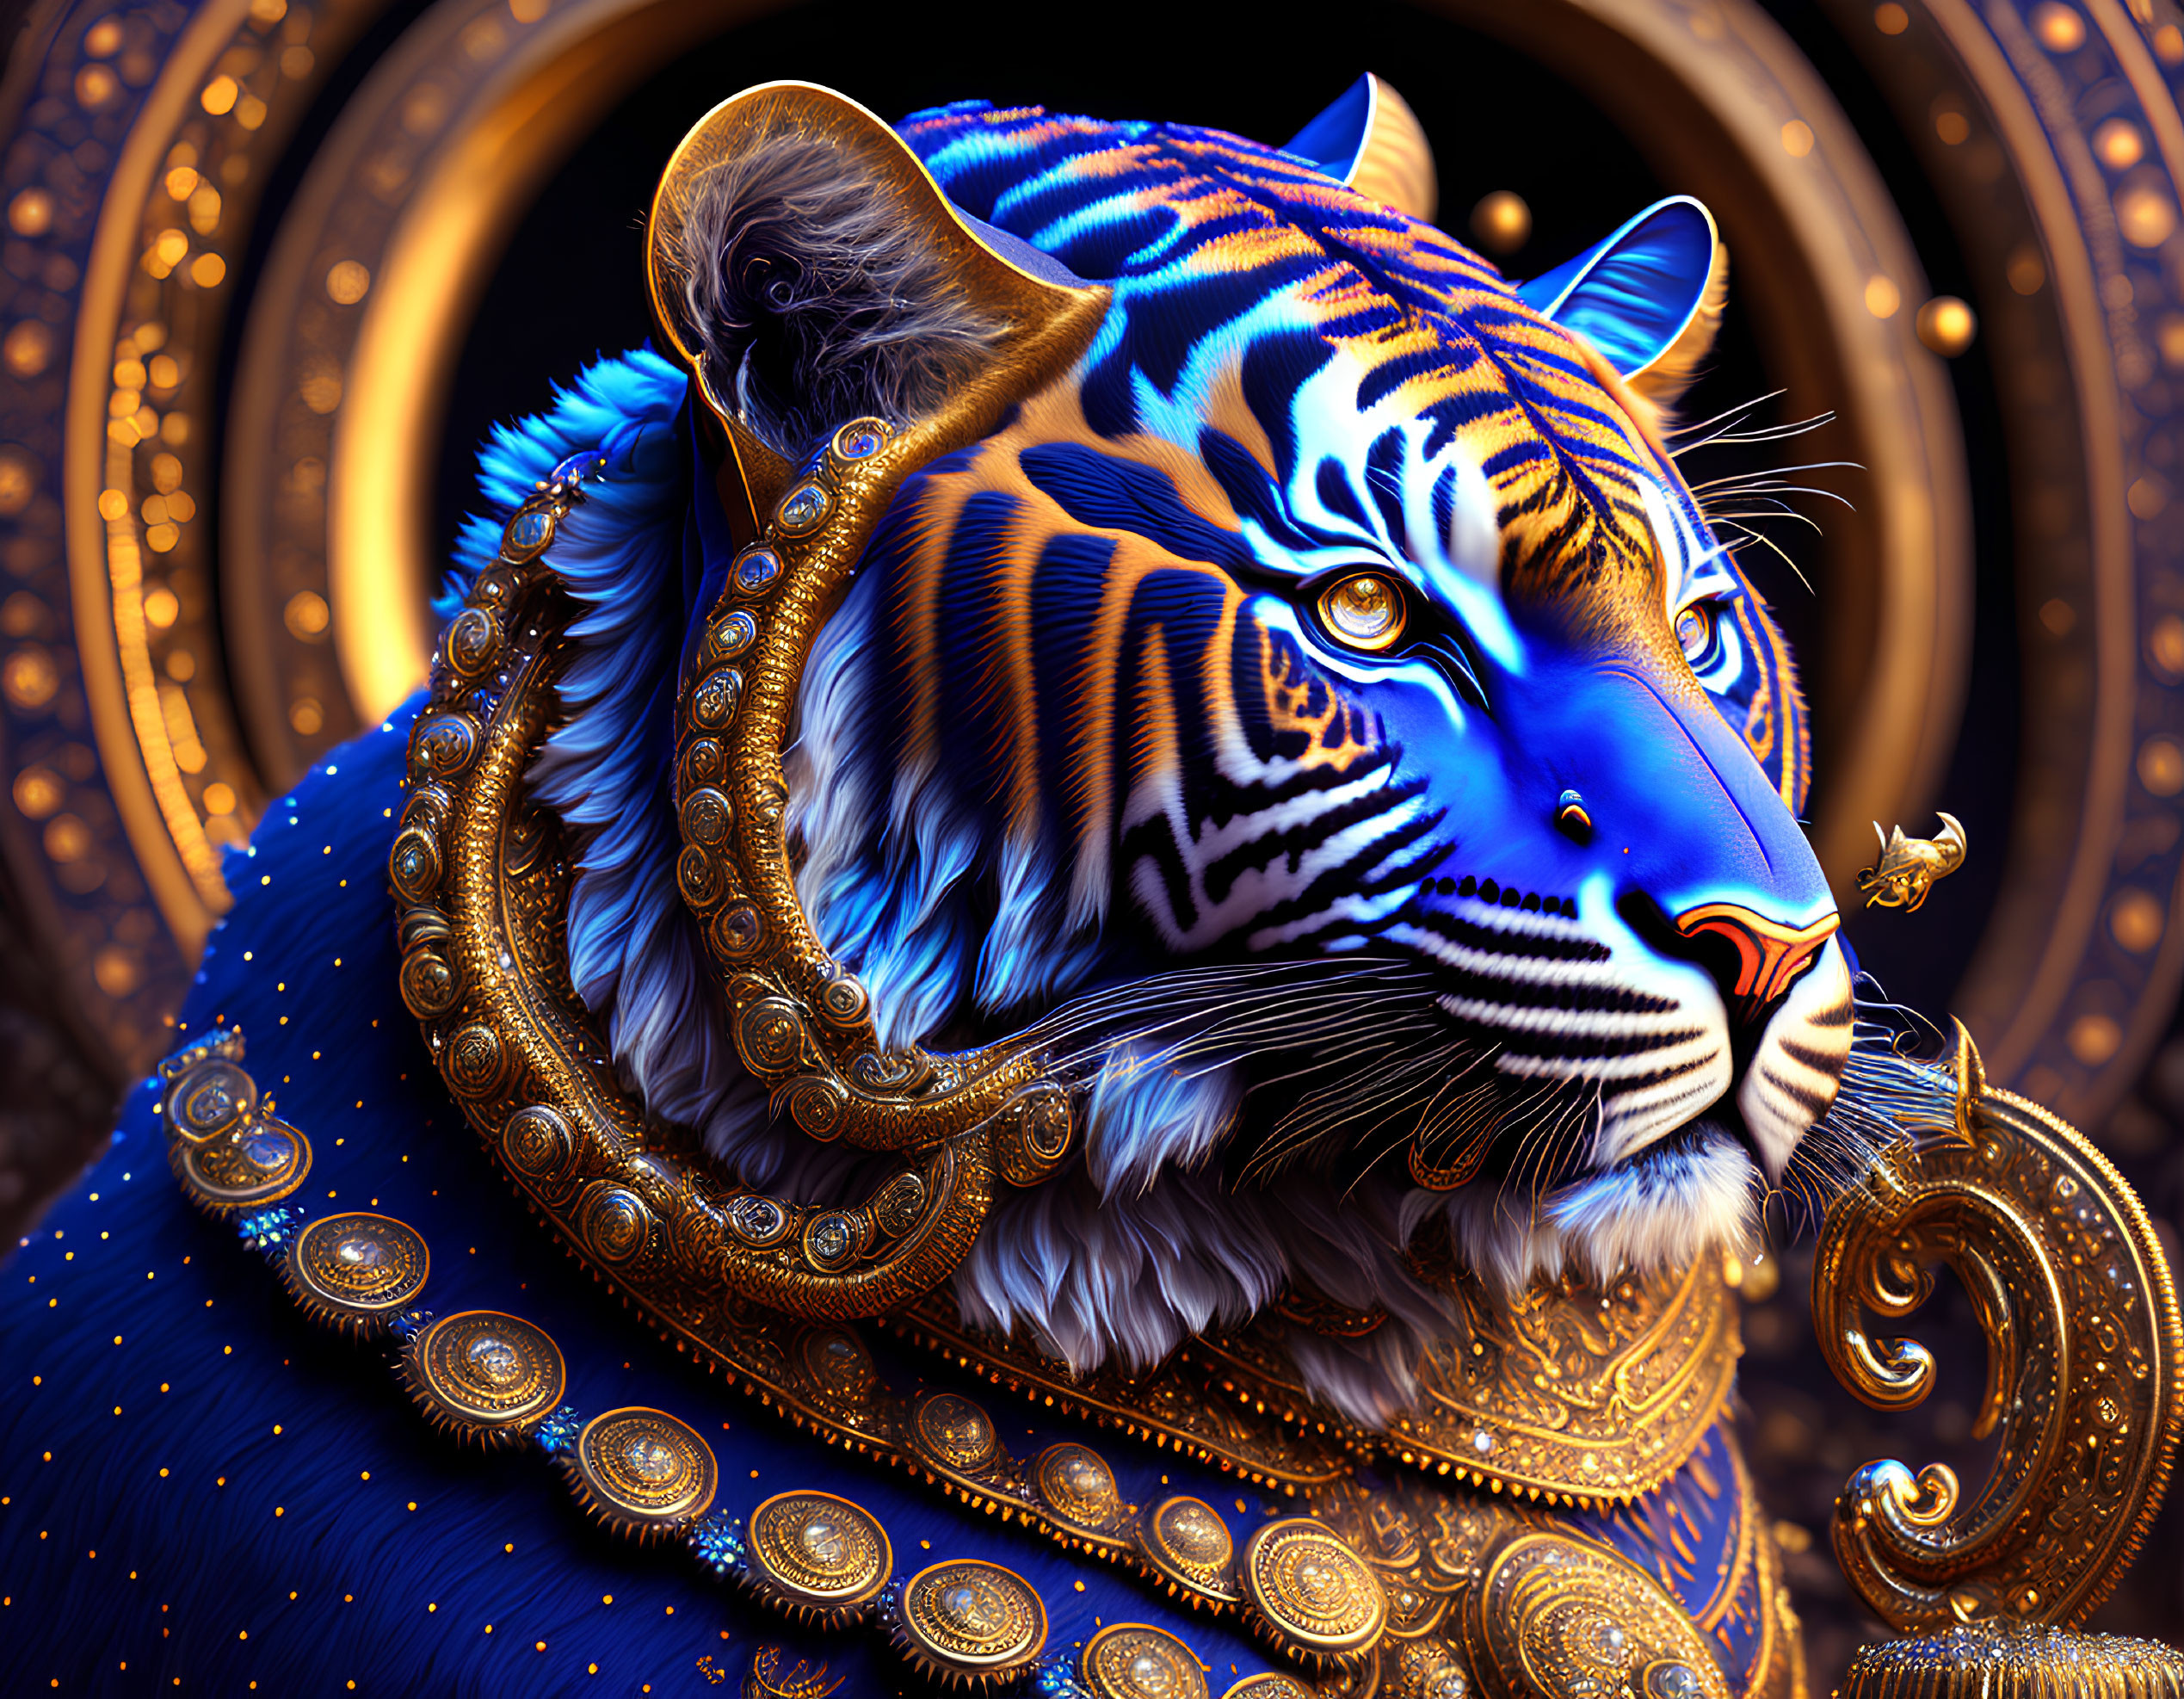 Majestic tiger in gold and blue armor on intricate background